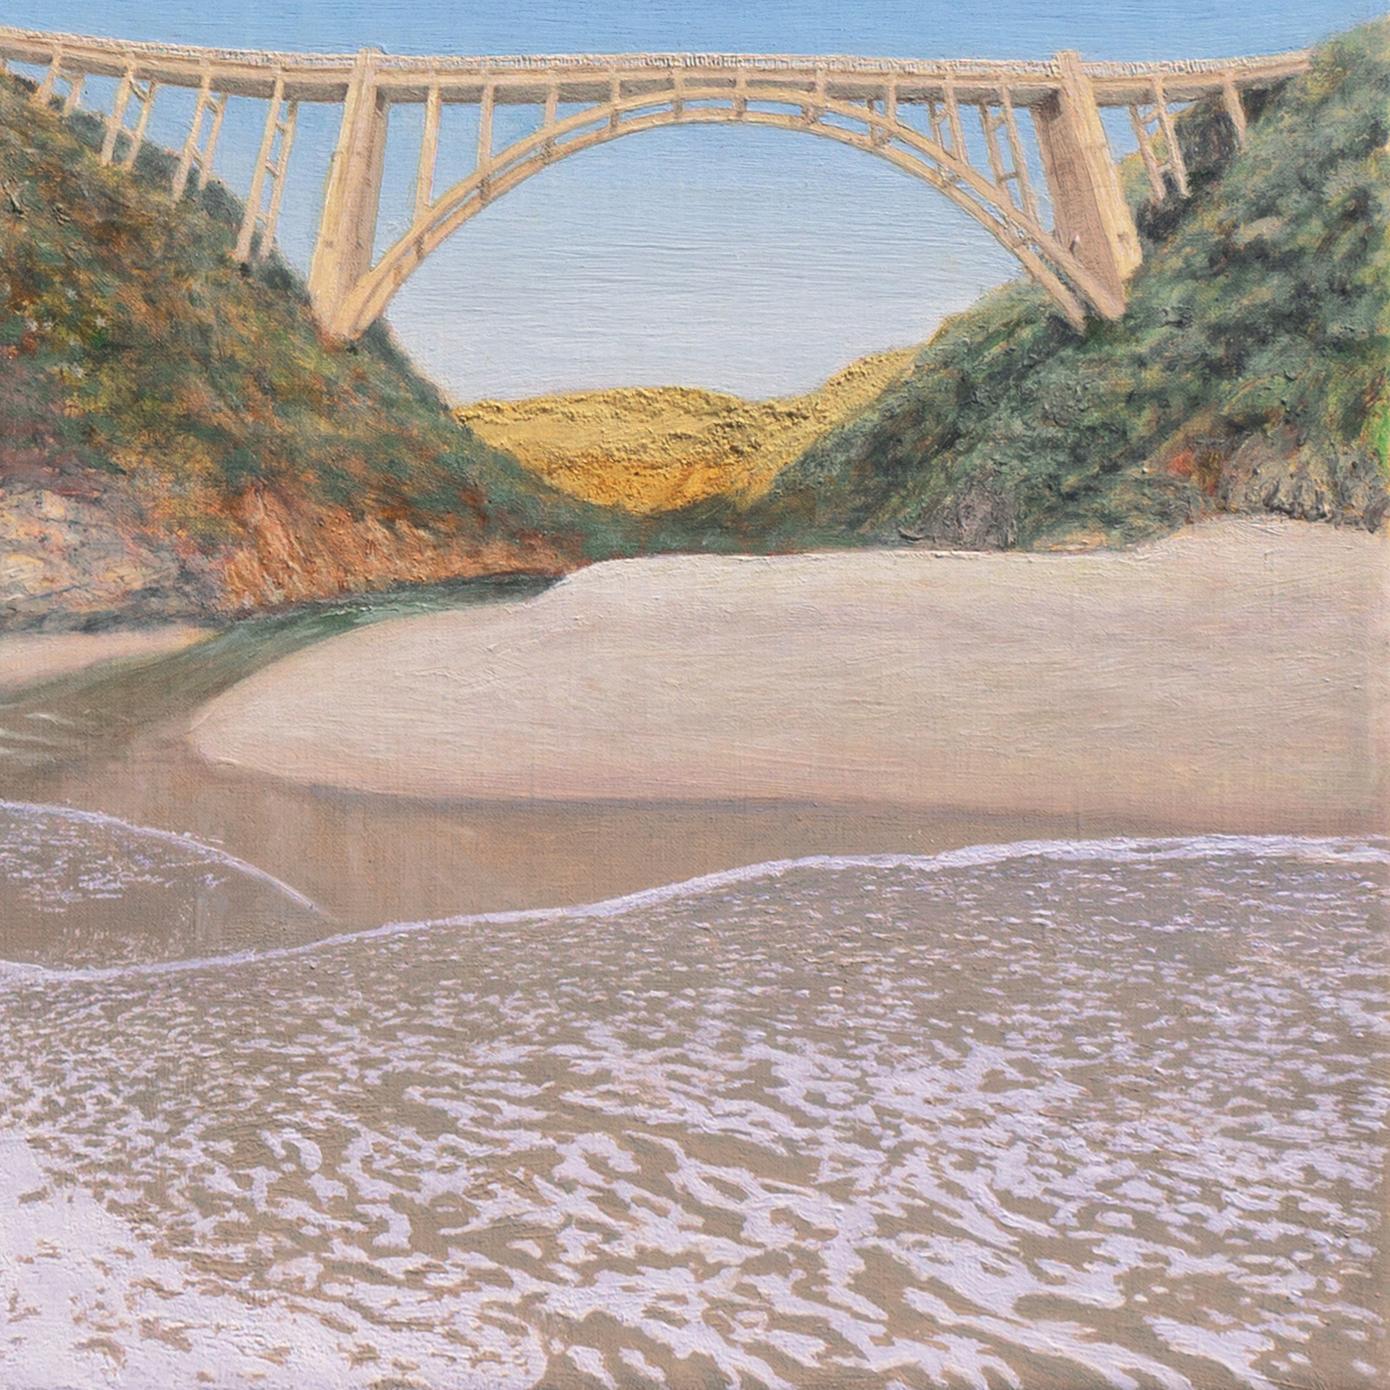 Signed, verso, 'David R. A. Watson' (American, born 1950), titled, 'Bixby Bridge, Big Surreal #1' and painted in 2023.

Artist Statement:
